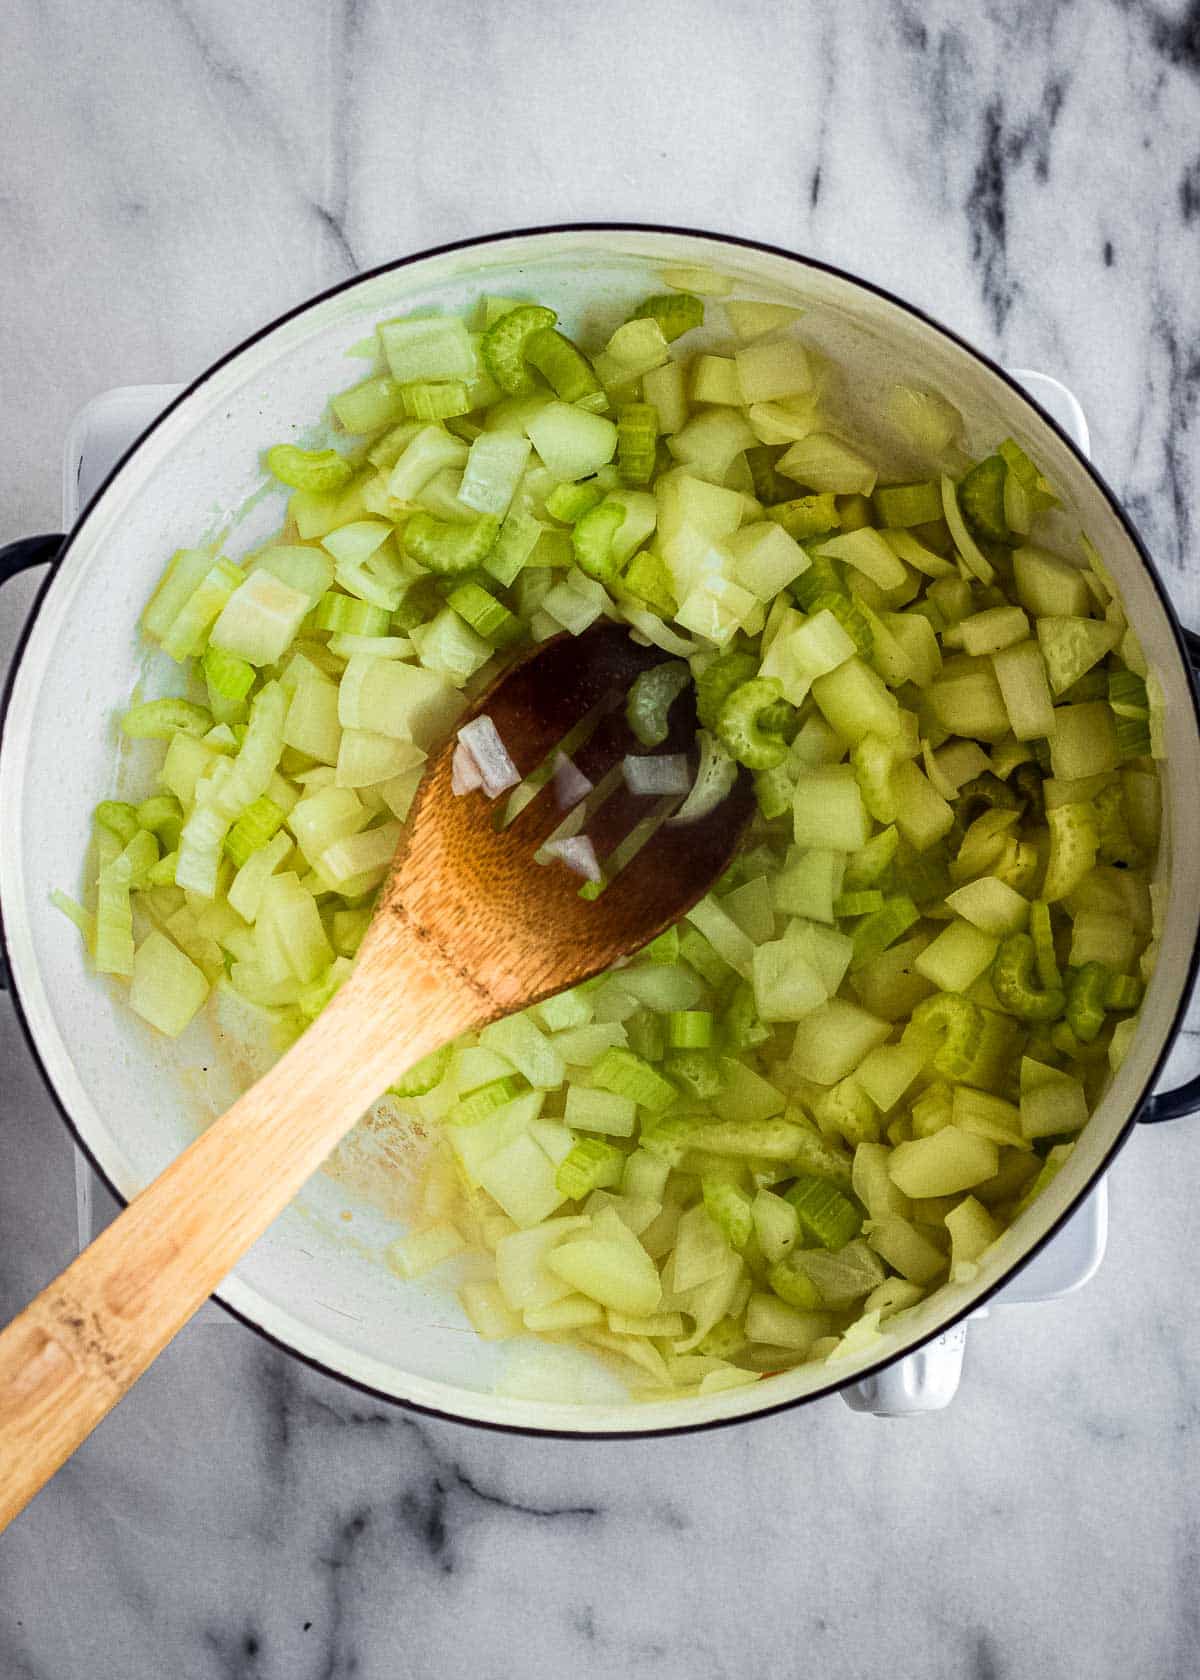 A large soup pot containing celery and onions sauteeing.